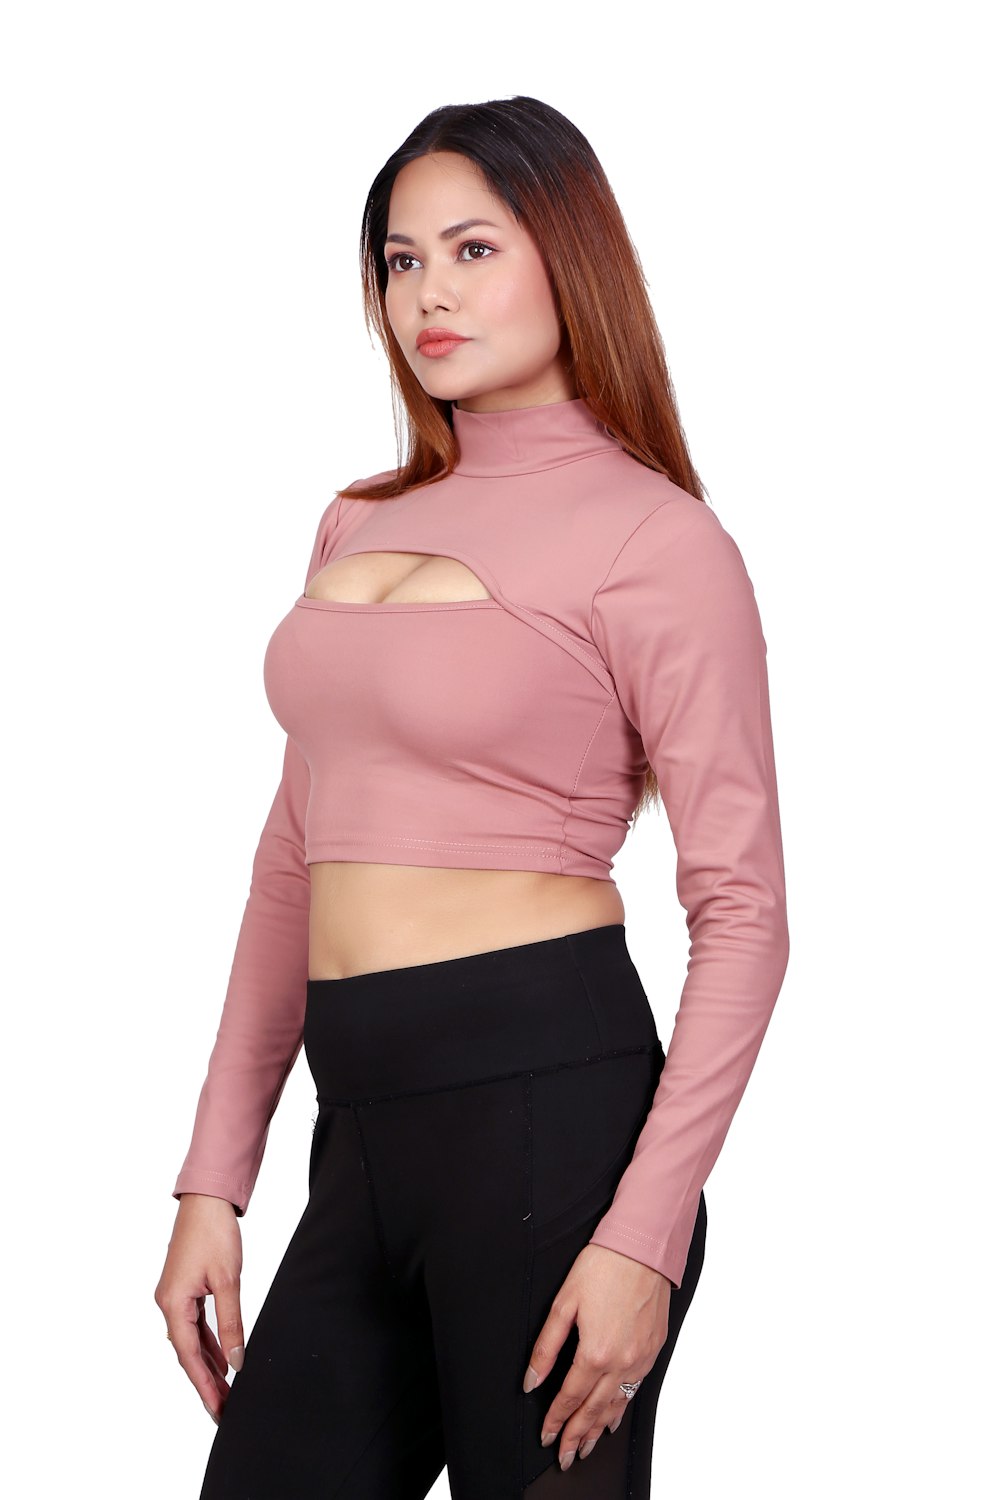 a woman wearing a pink top and black pants